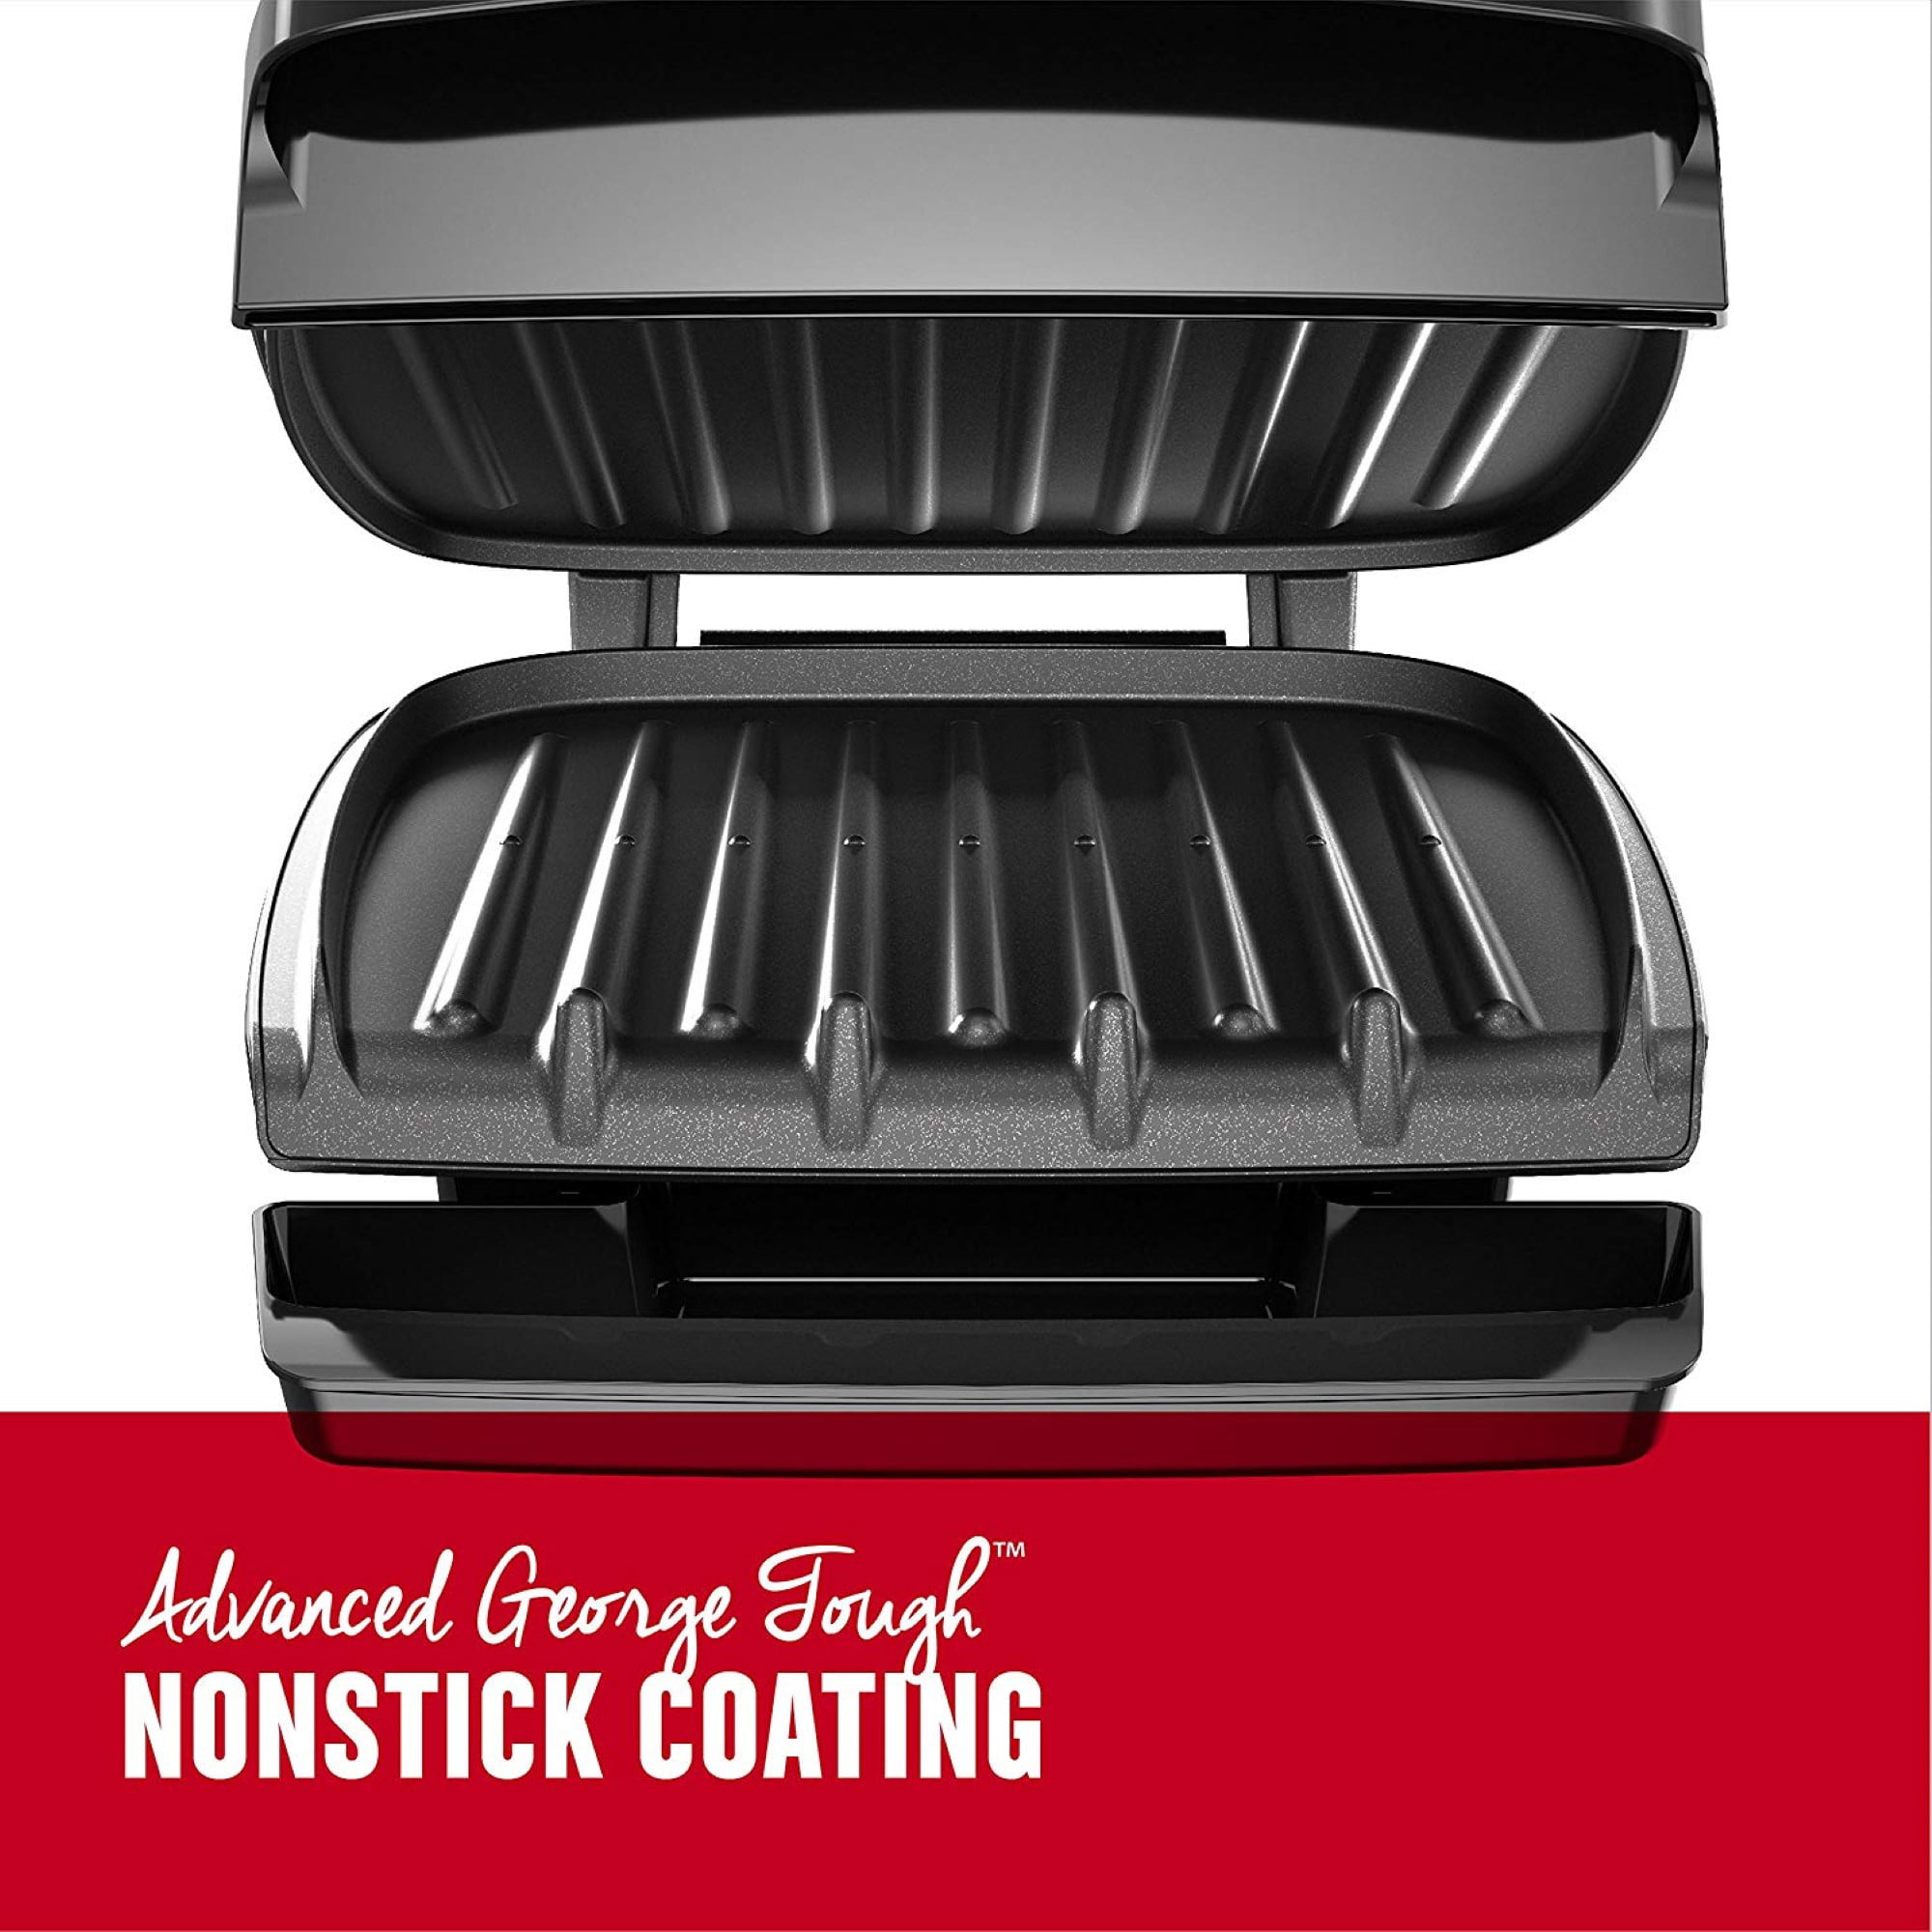 Health and Home 4-Serving Classic Plate Grill and Pannini Press Black